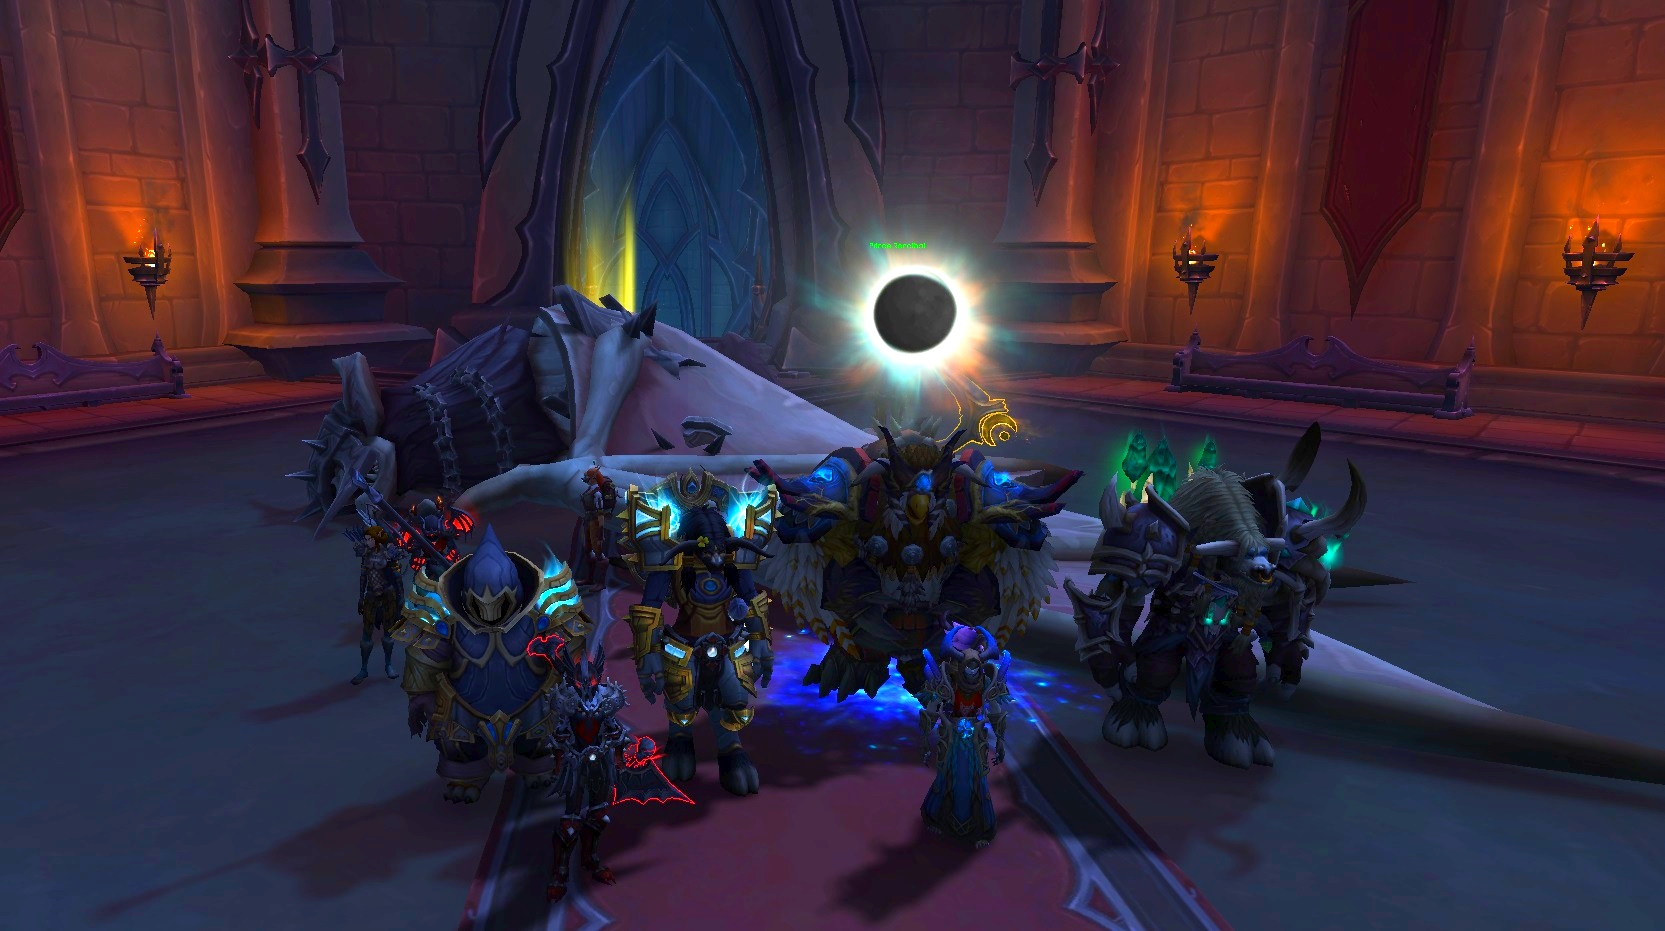 Gathered around the defeated corpse of Shriekwing